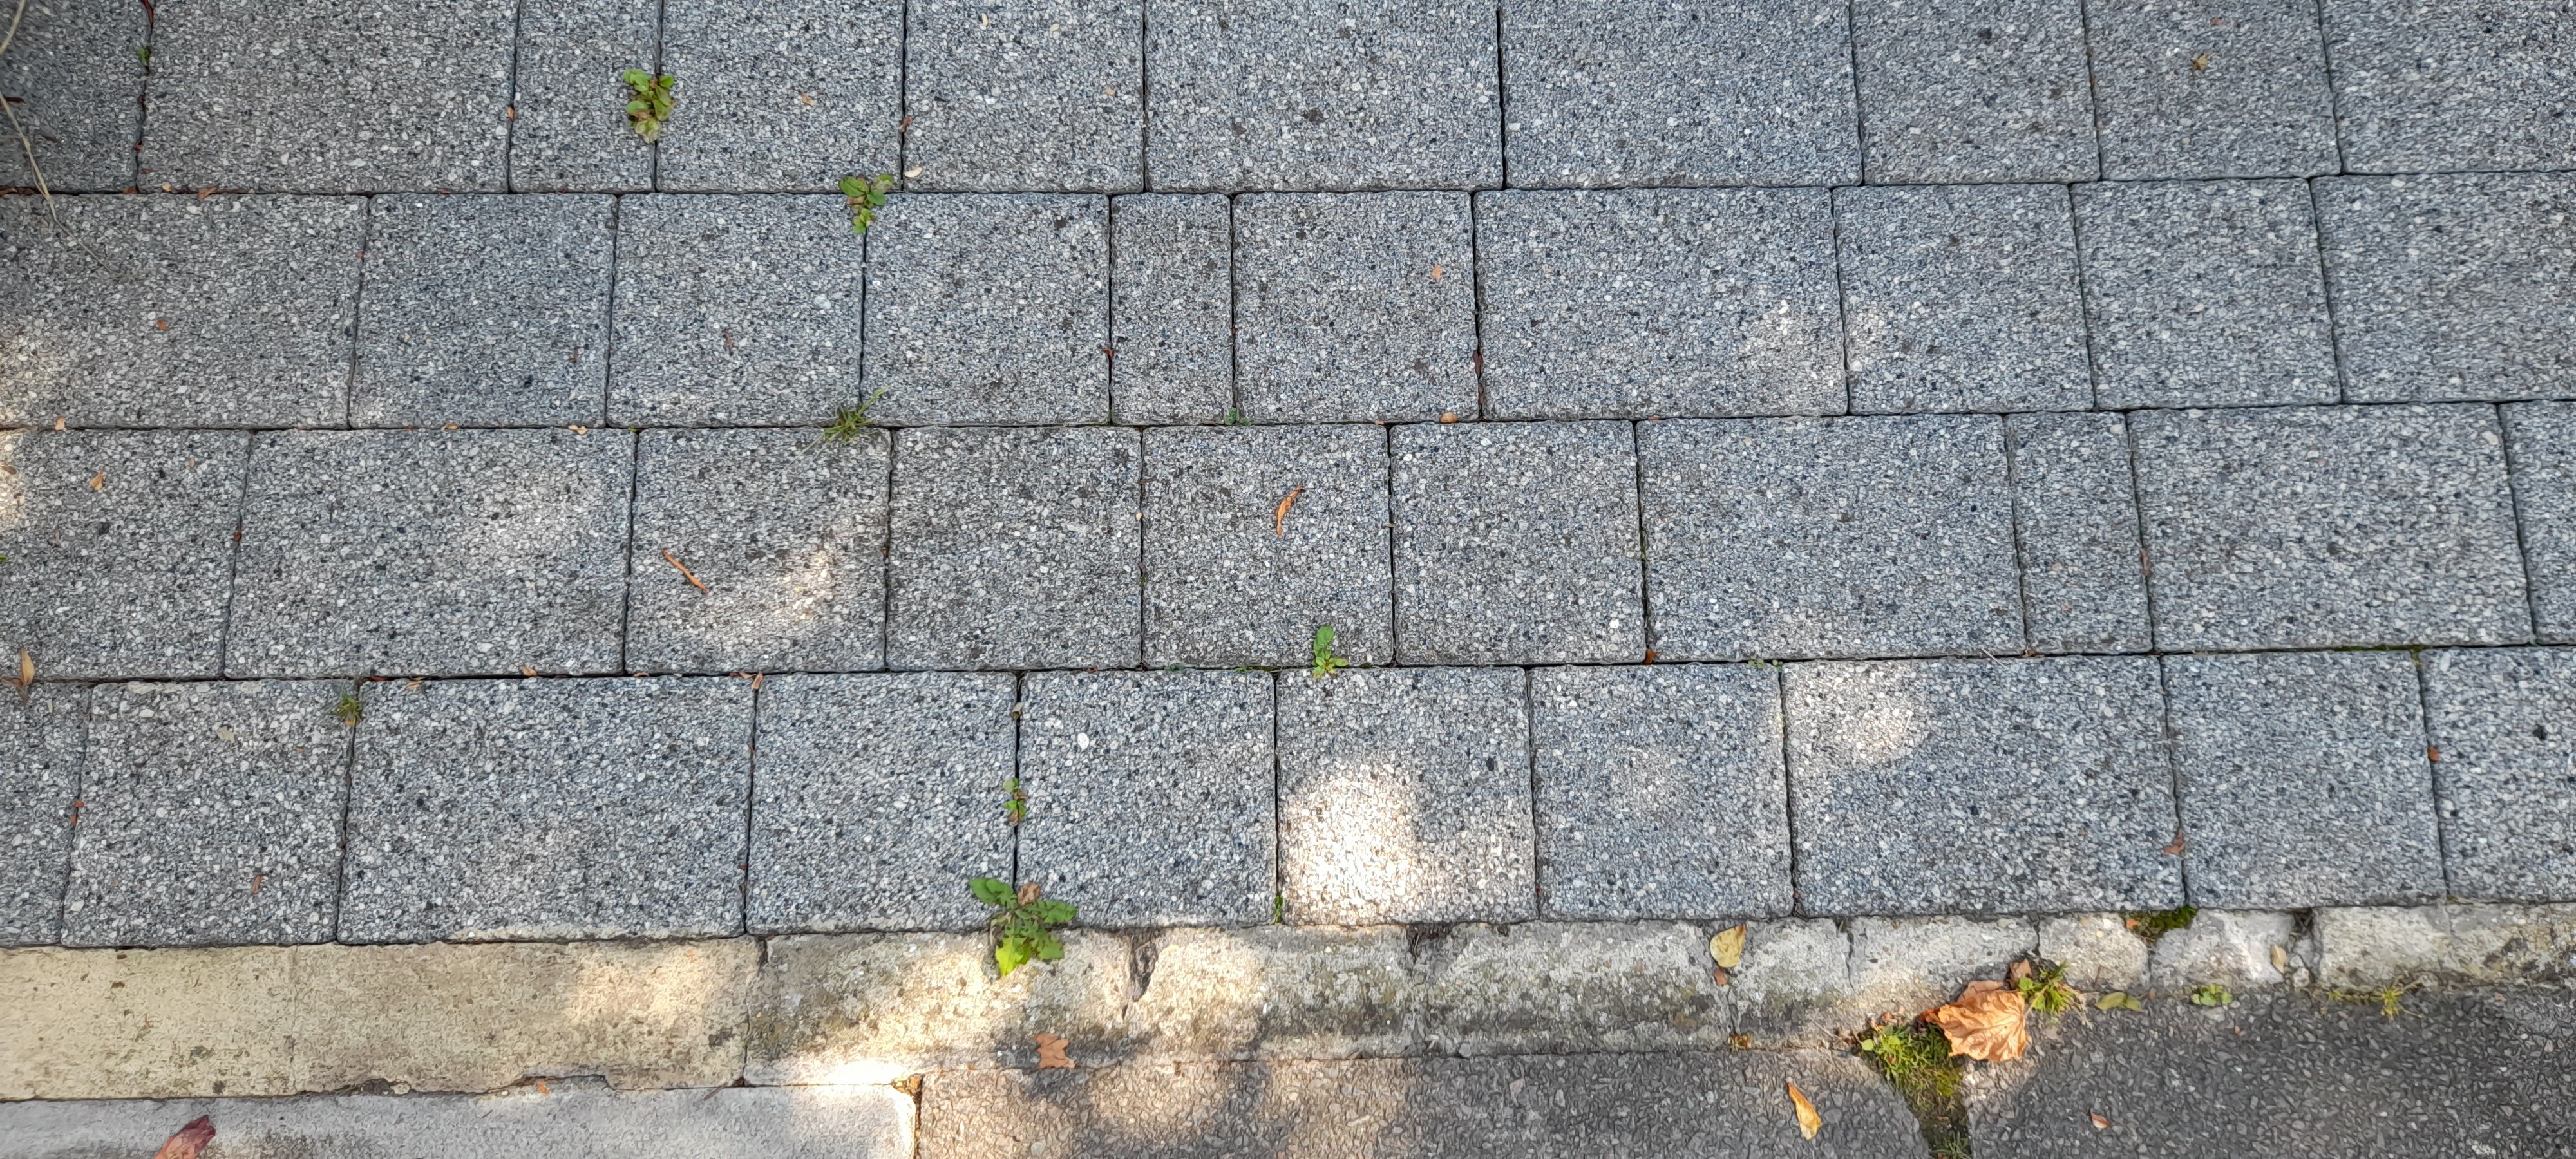 paving with weeds